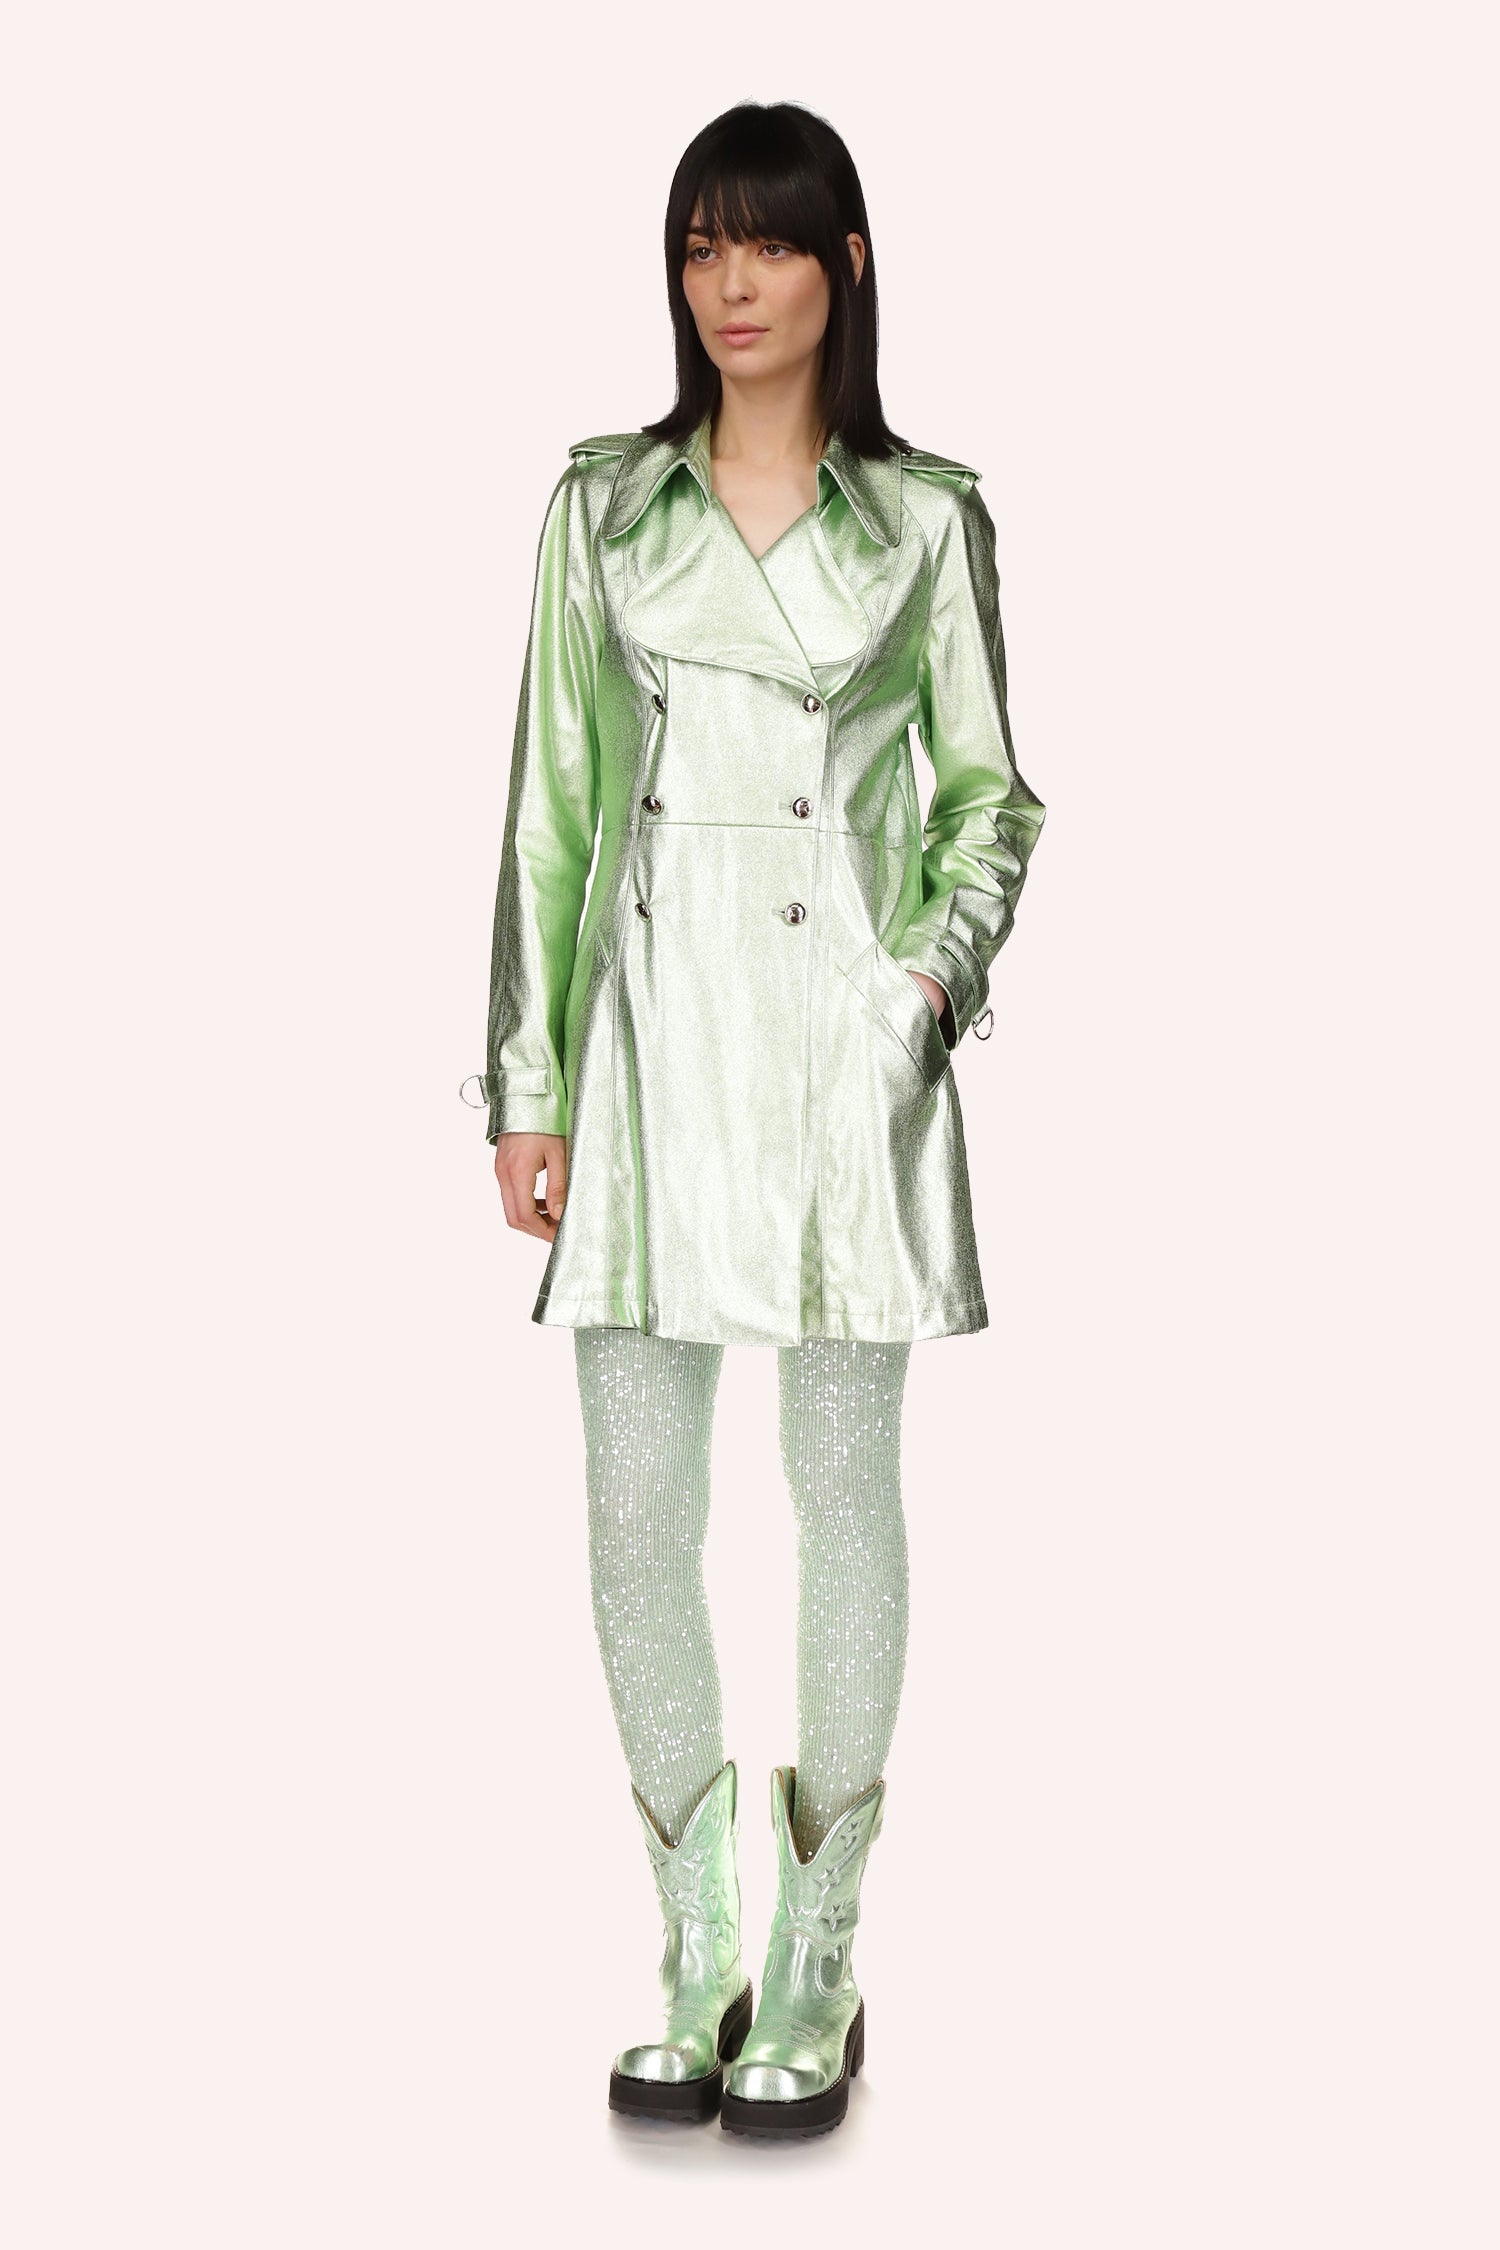 Peppermint Trench Coat, mid-length, large collar, long sleeves with buckle cuffs, epaulets, 6-silver buttons, 2-pockets 